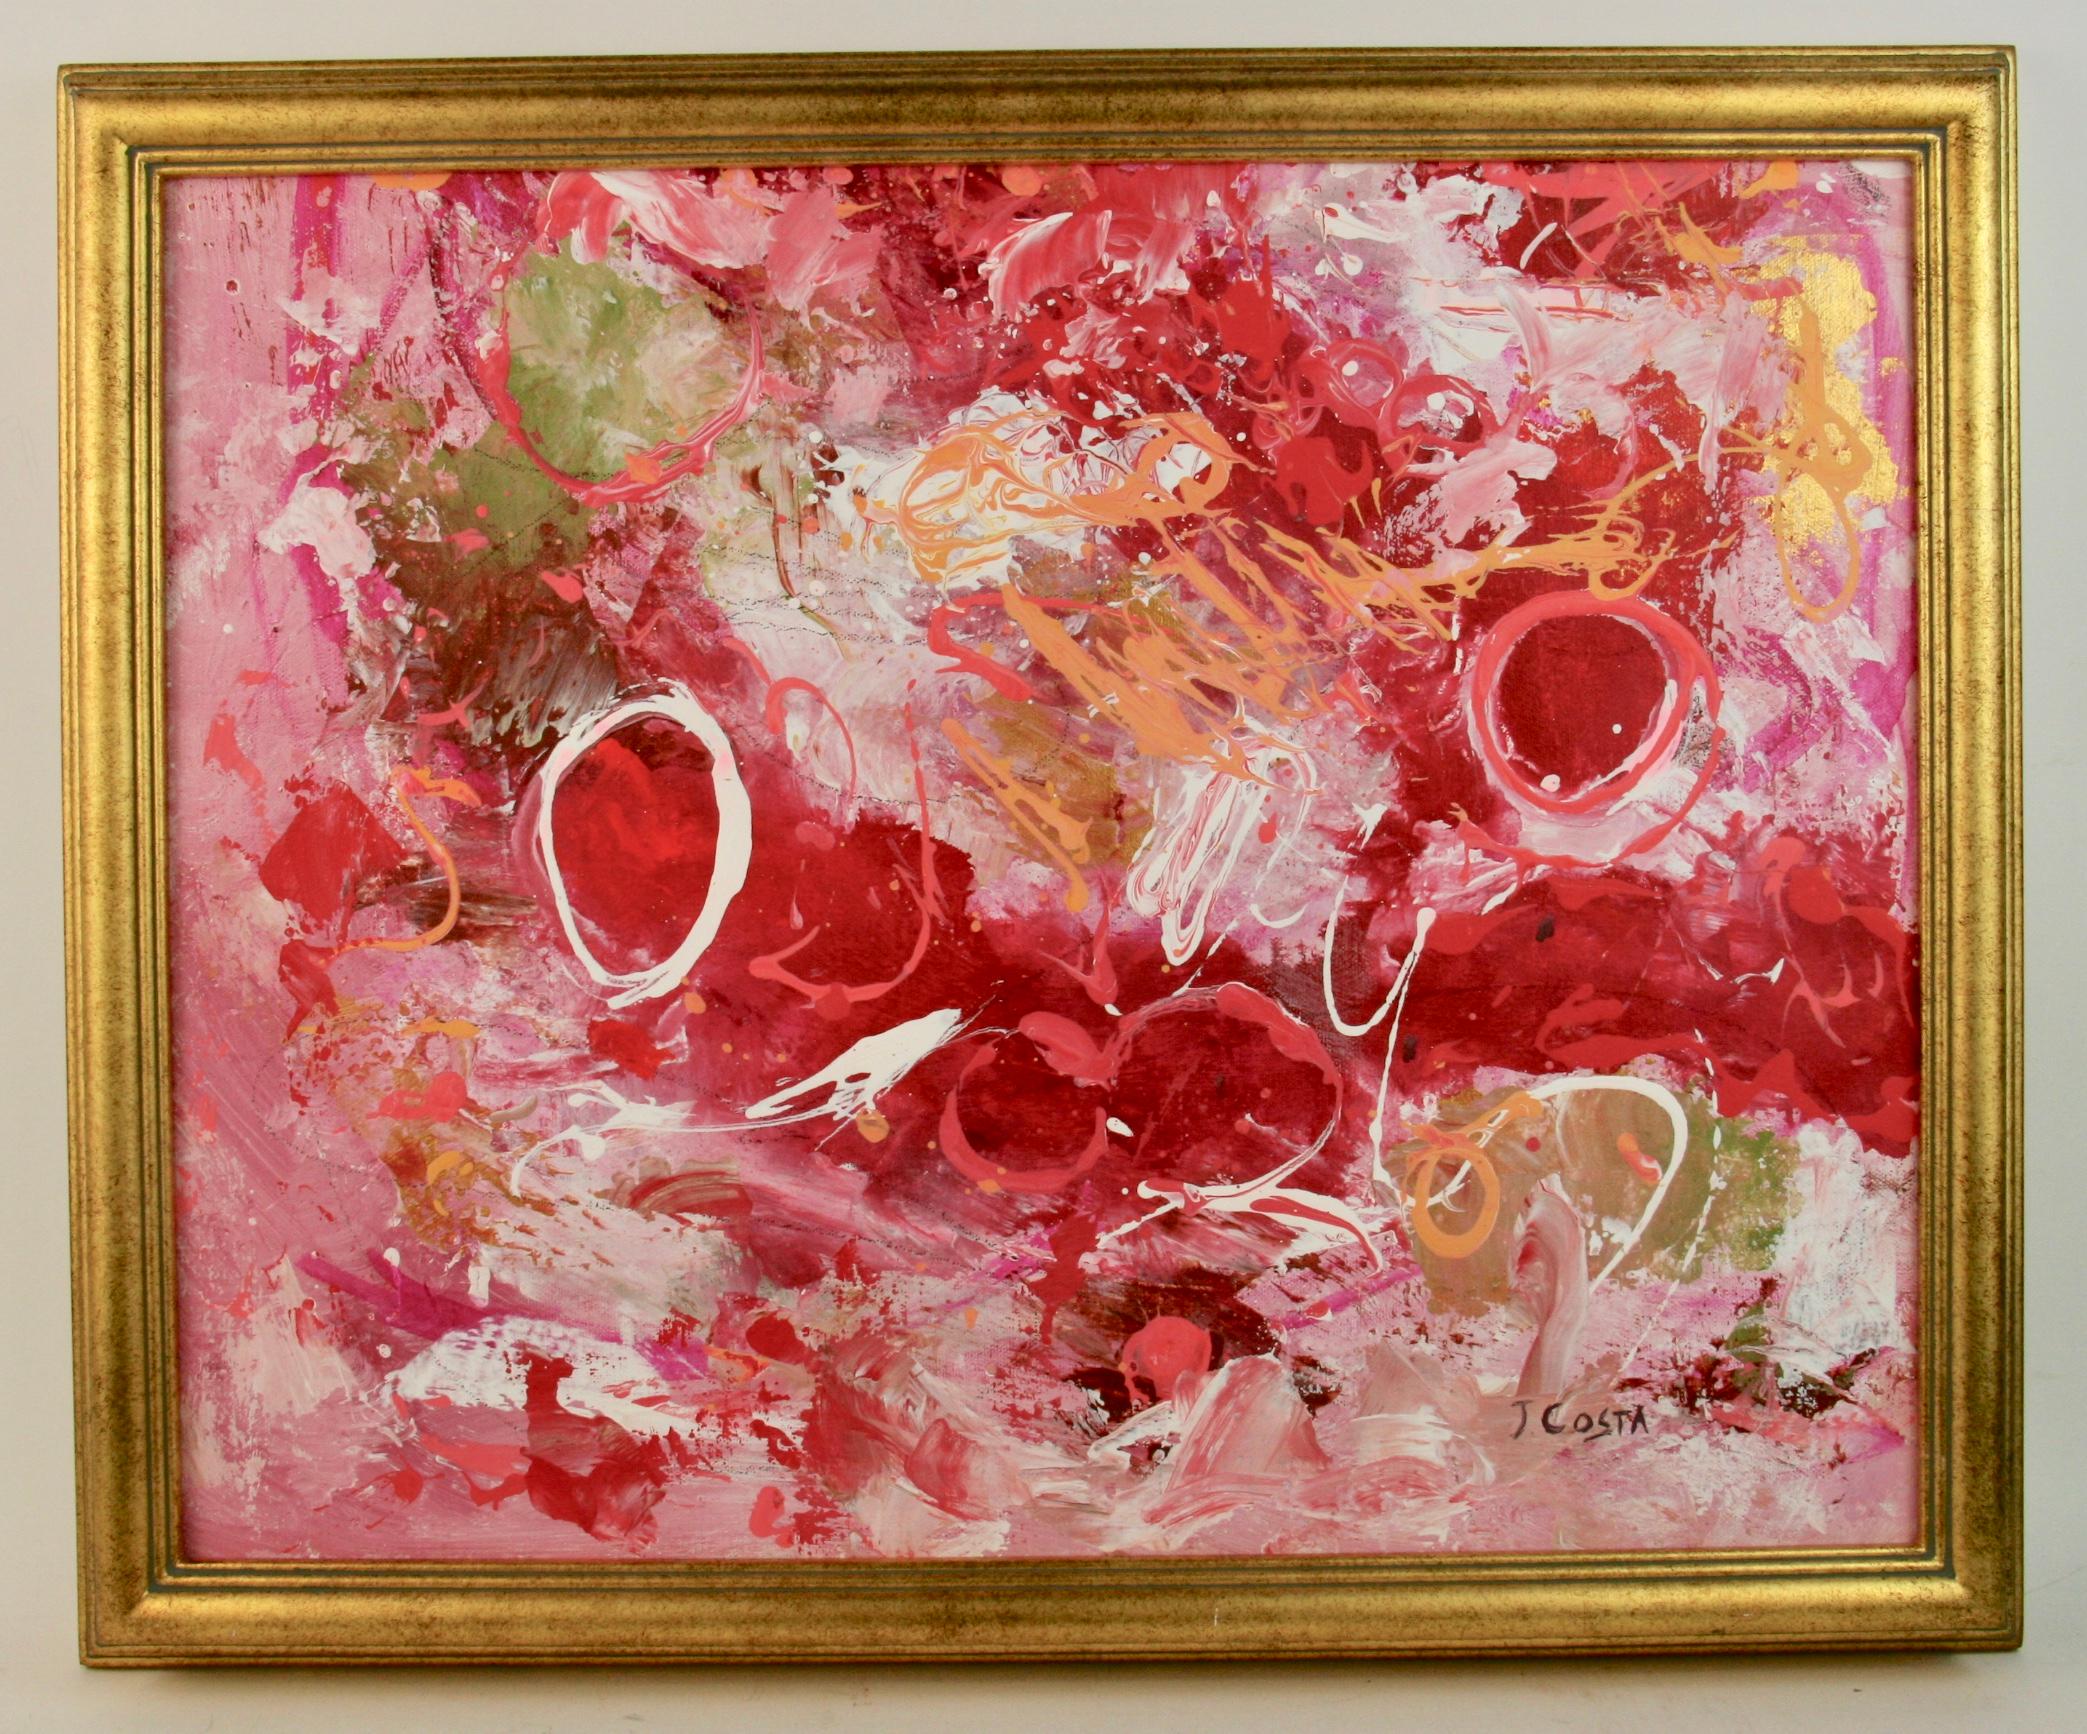 Costa Abstract Painting - Vintage Italian Abstract Expressionist Flaming Red Heart Painting 1970